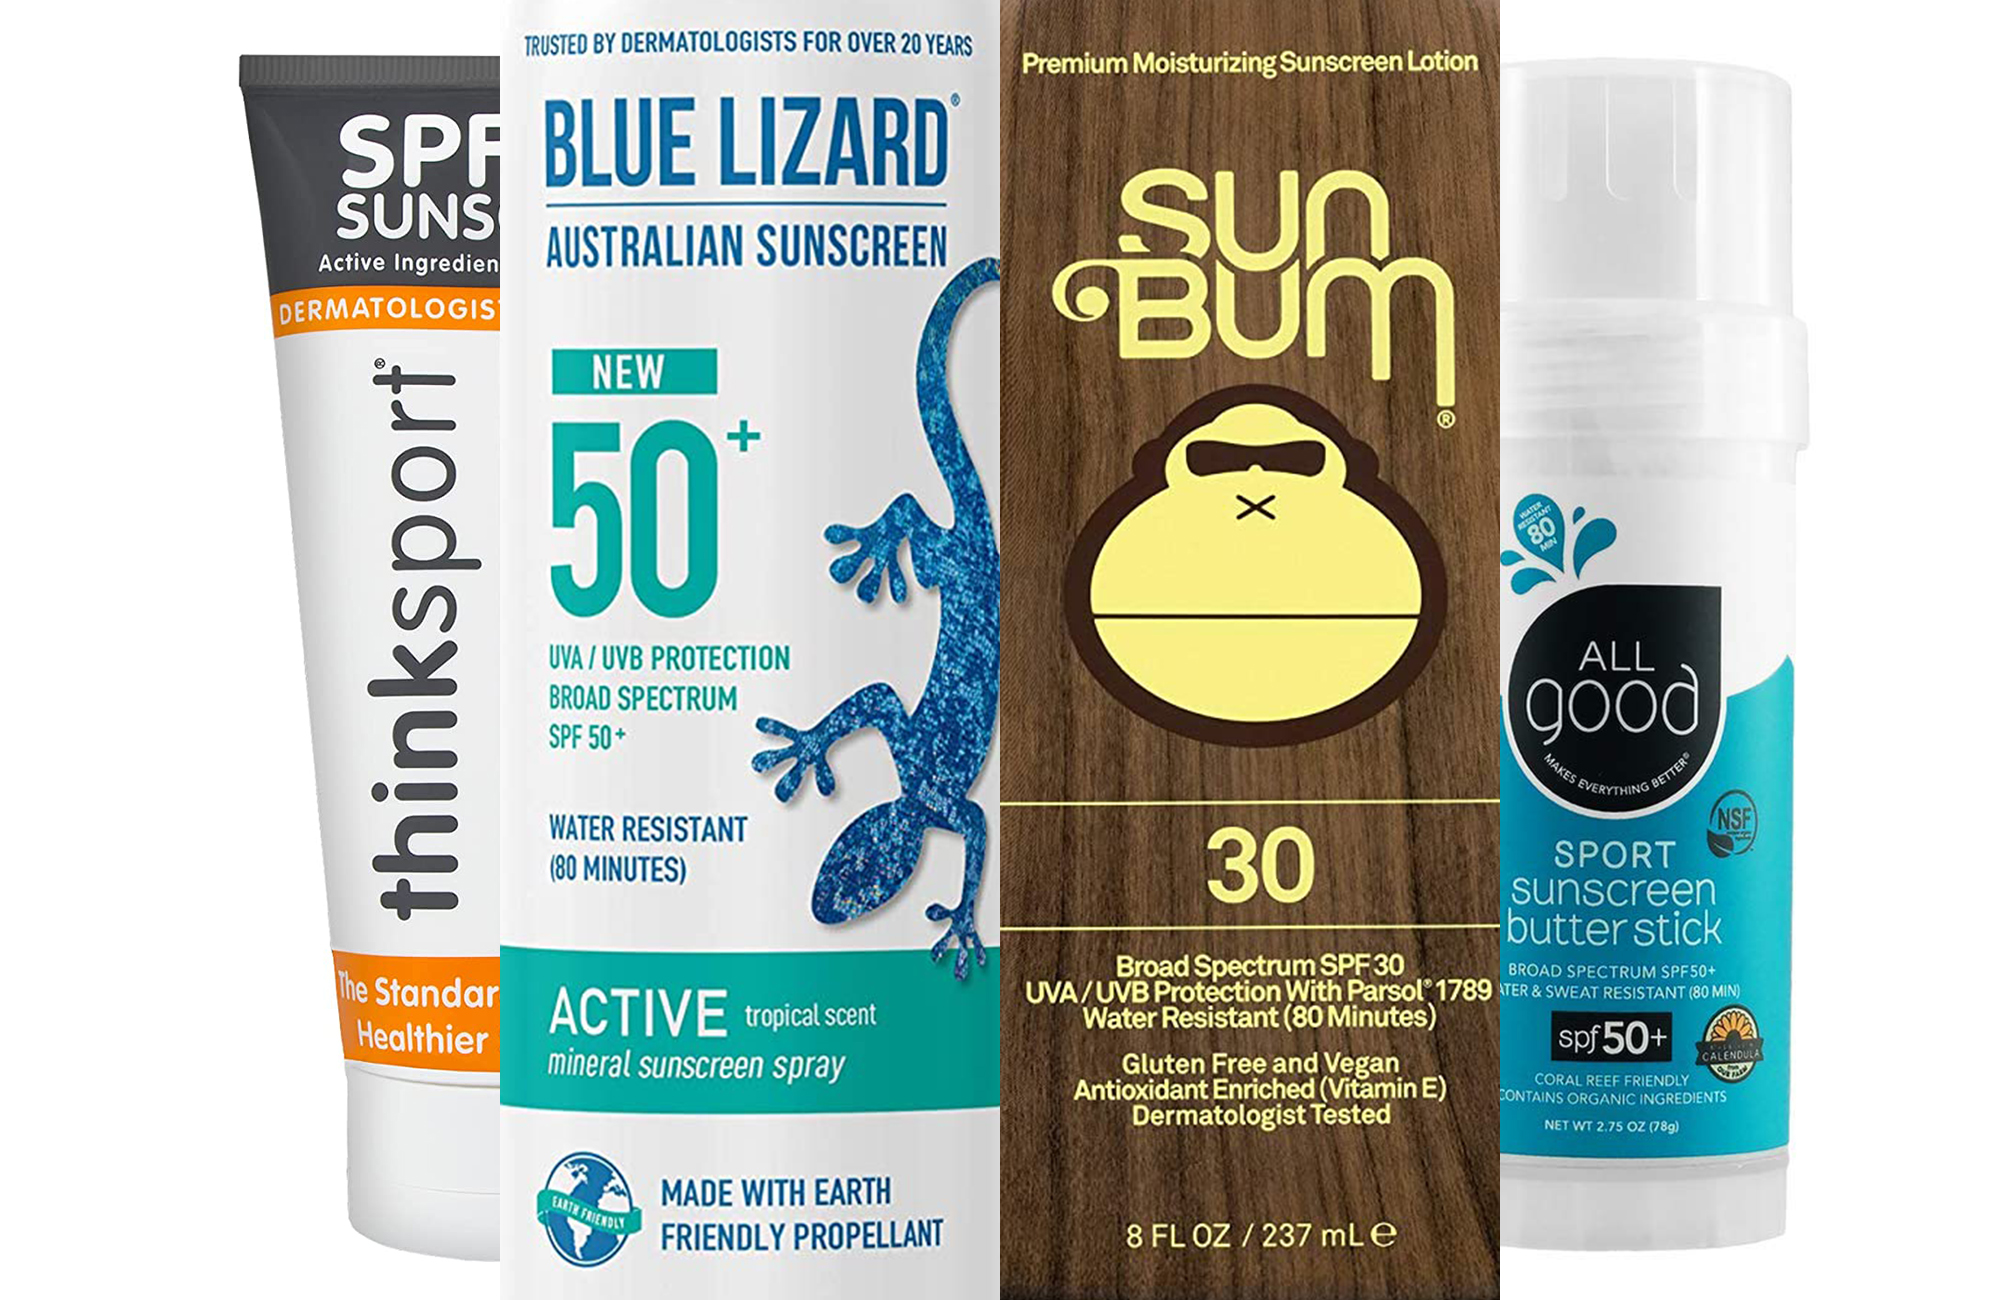 Reef Safe Sunscreens: Is Your Sunscreen Safe For Coral?